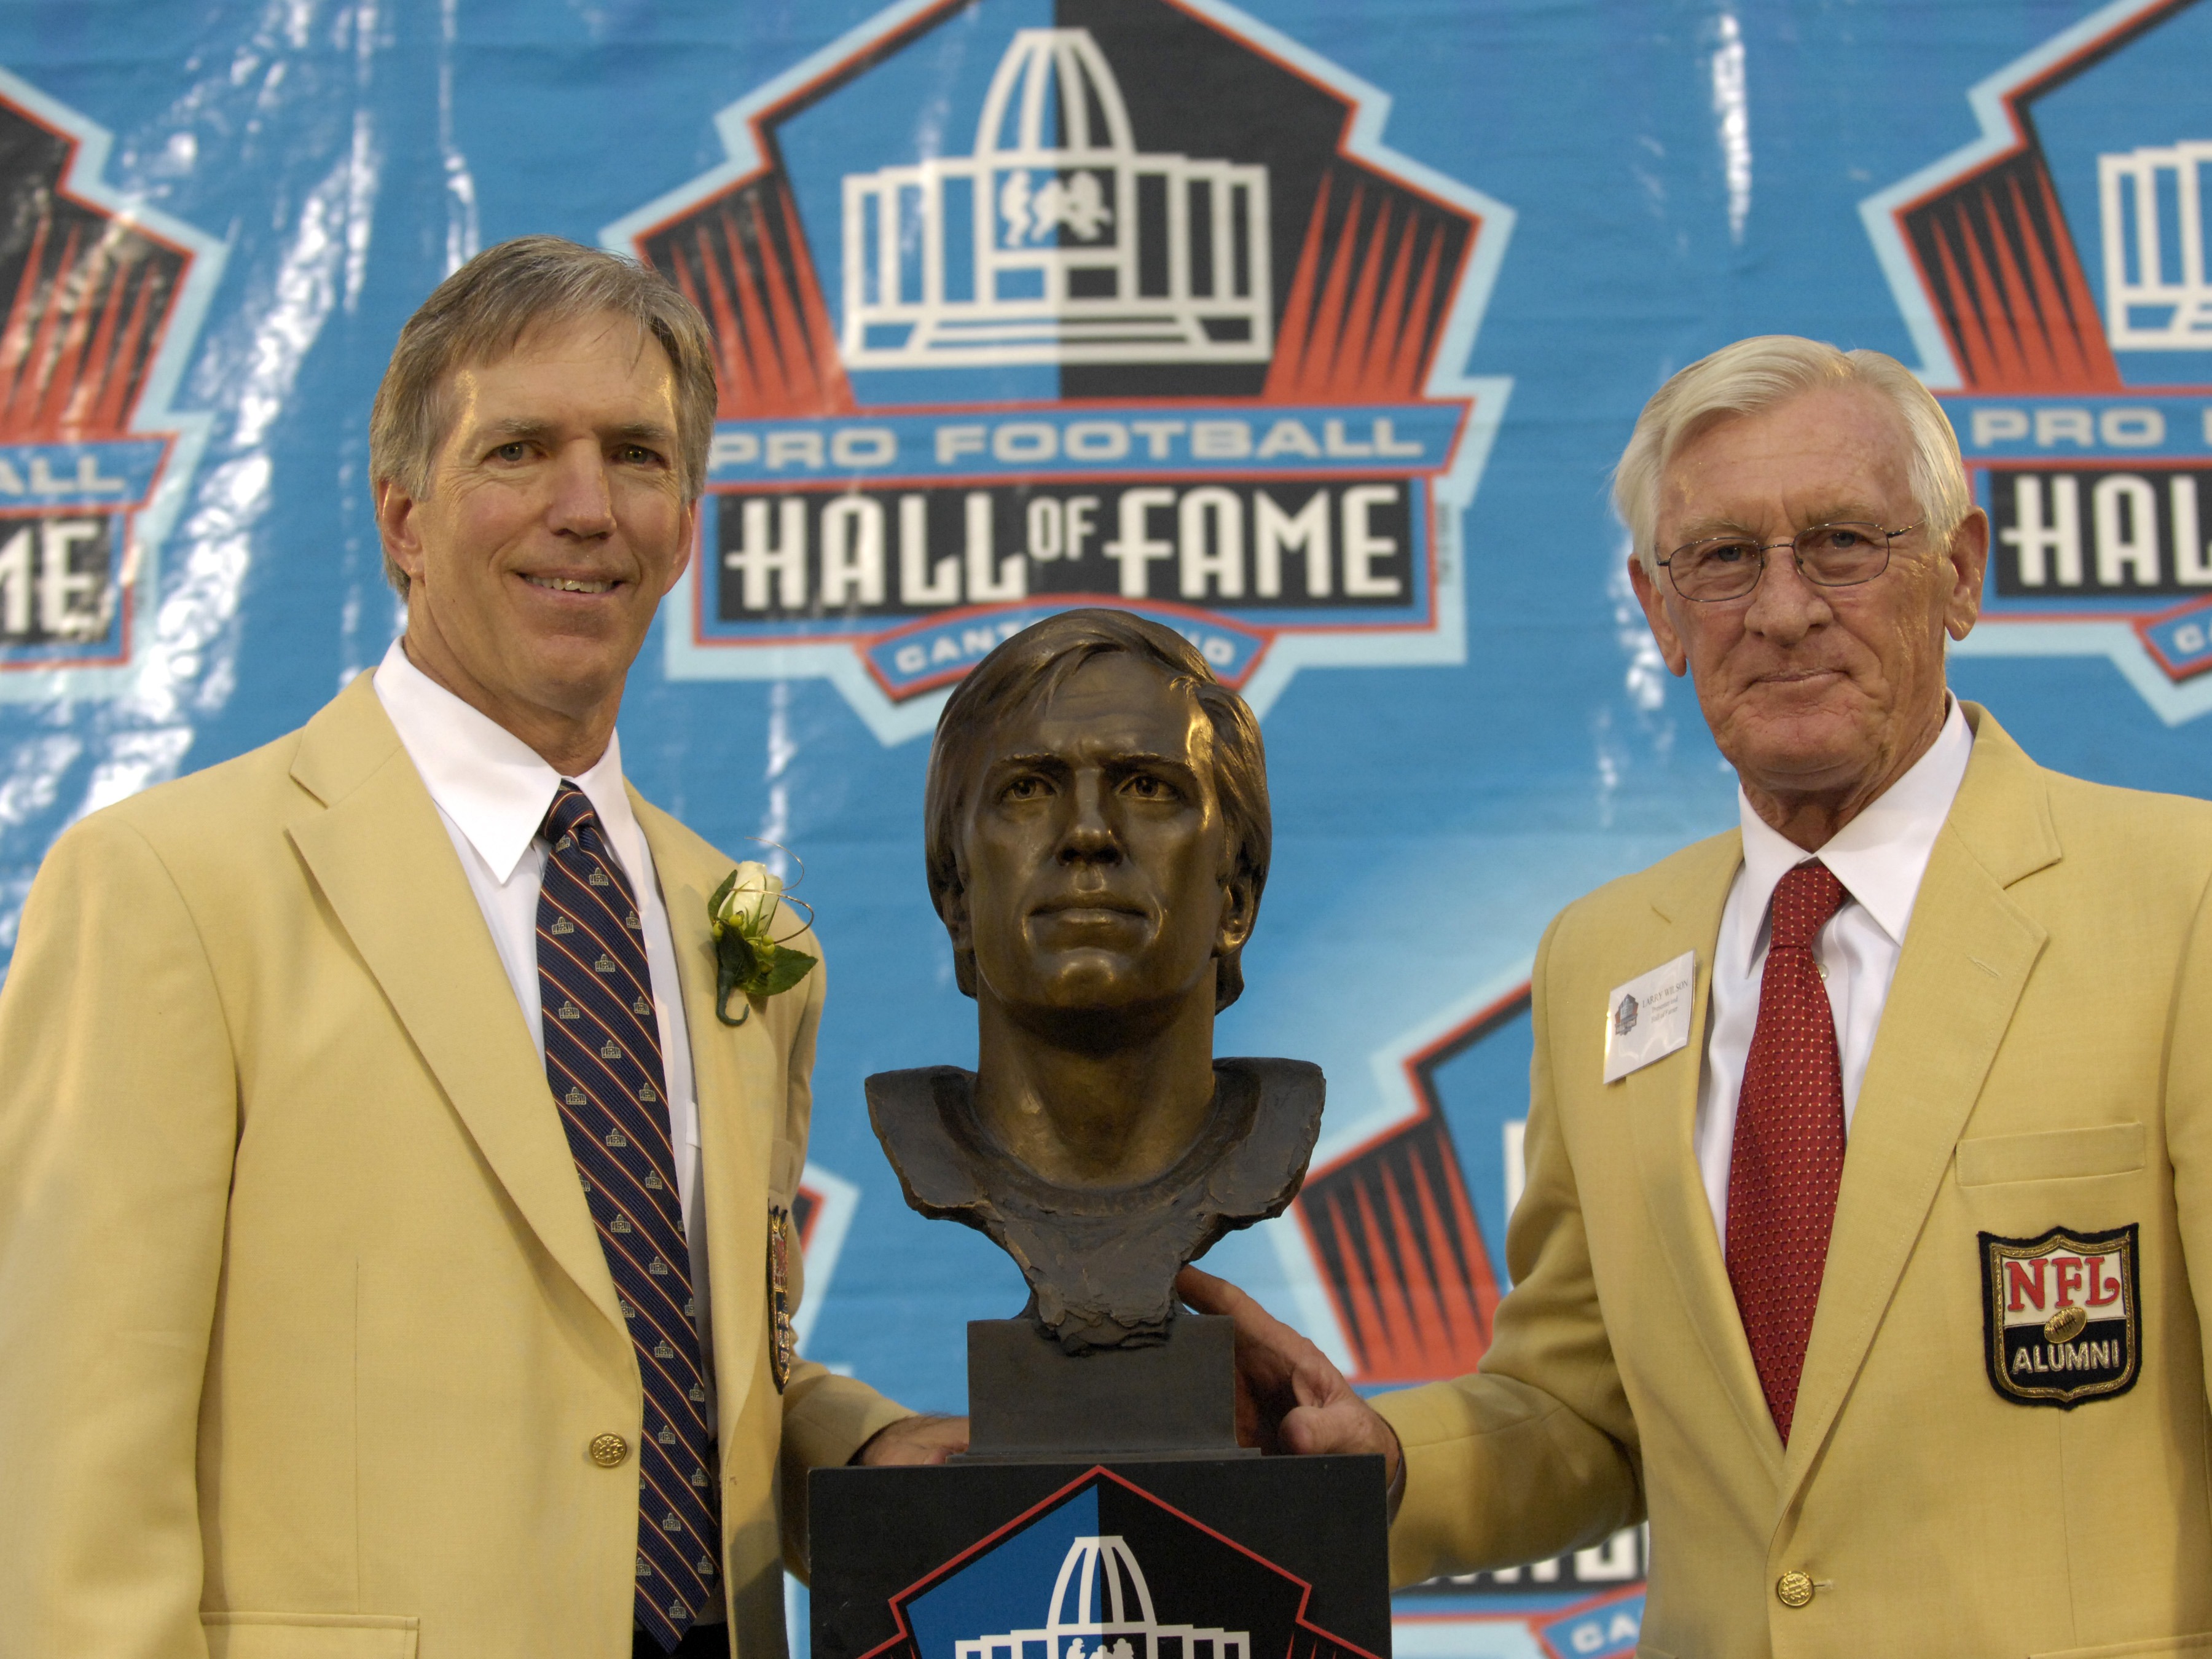 Larry Wilson Along With Roger Wehrli At The Hall of Fame